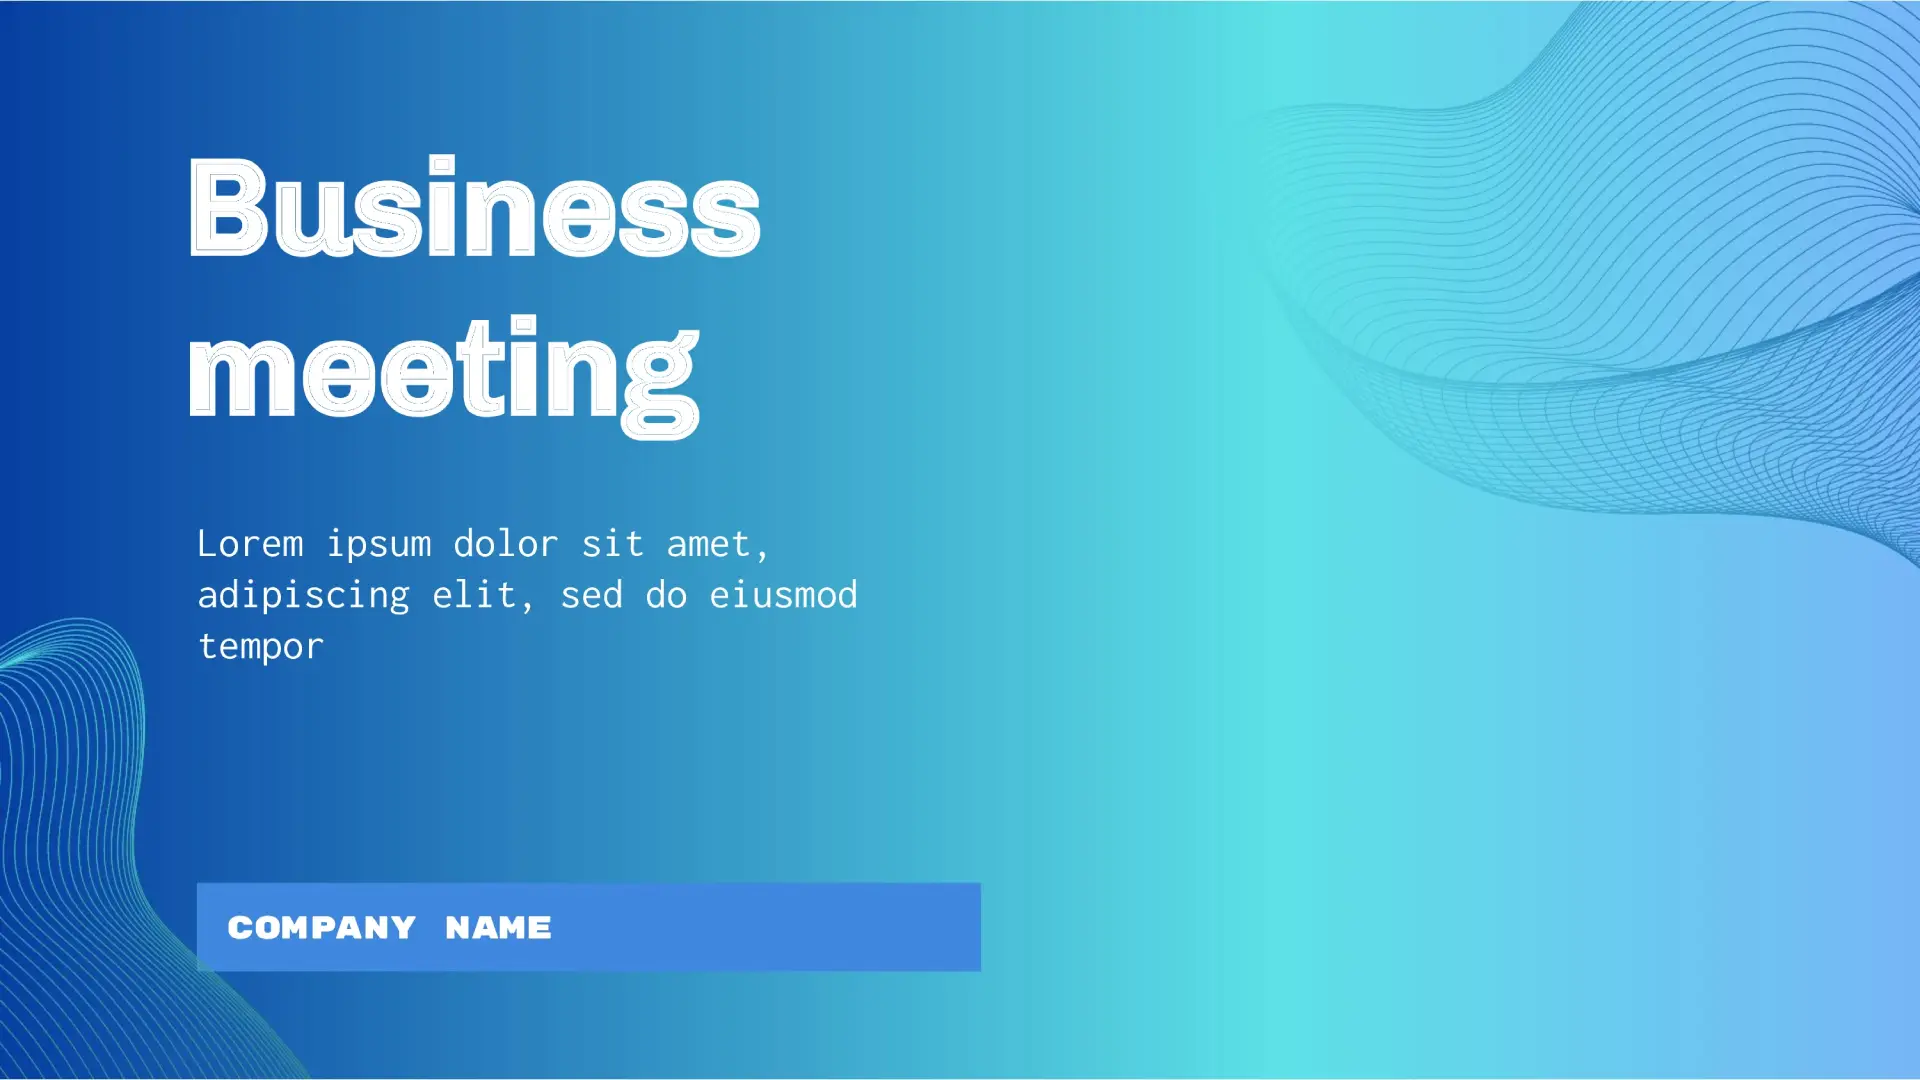 Business Meeting Template for Google Slides